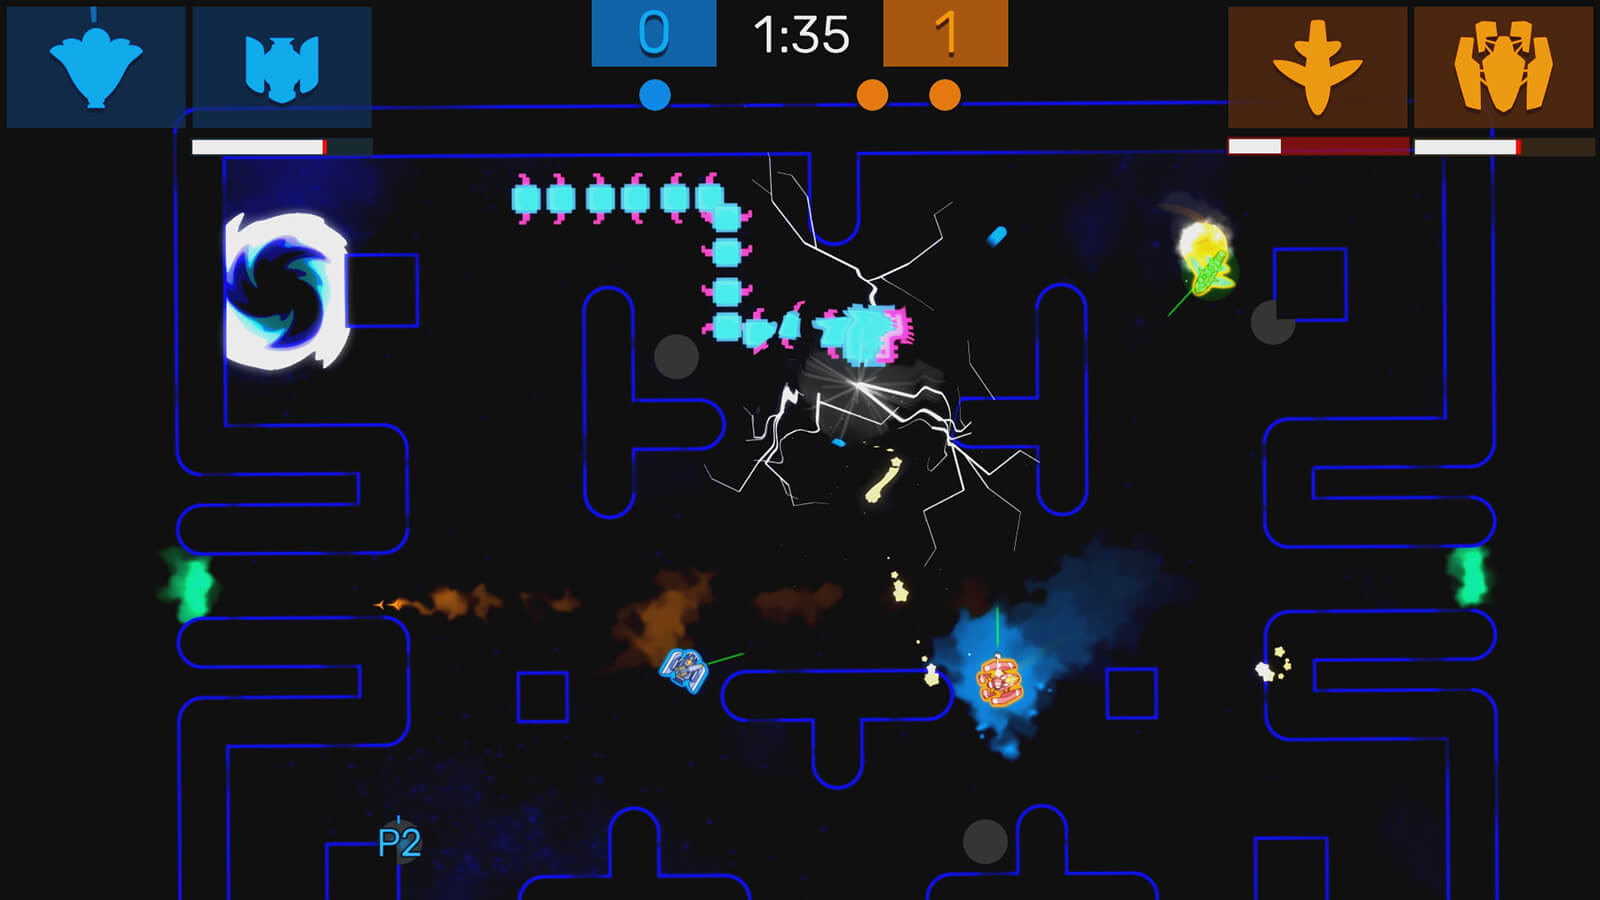 A turquoise centipede travels through a blue Pac-Man like playing field surrounded by the players.